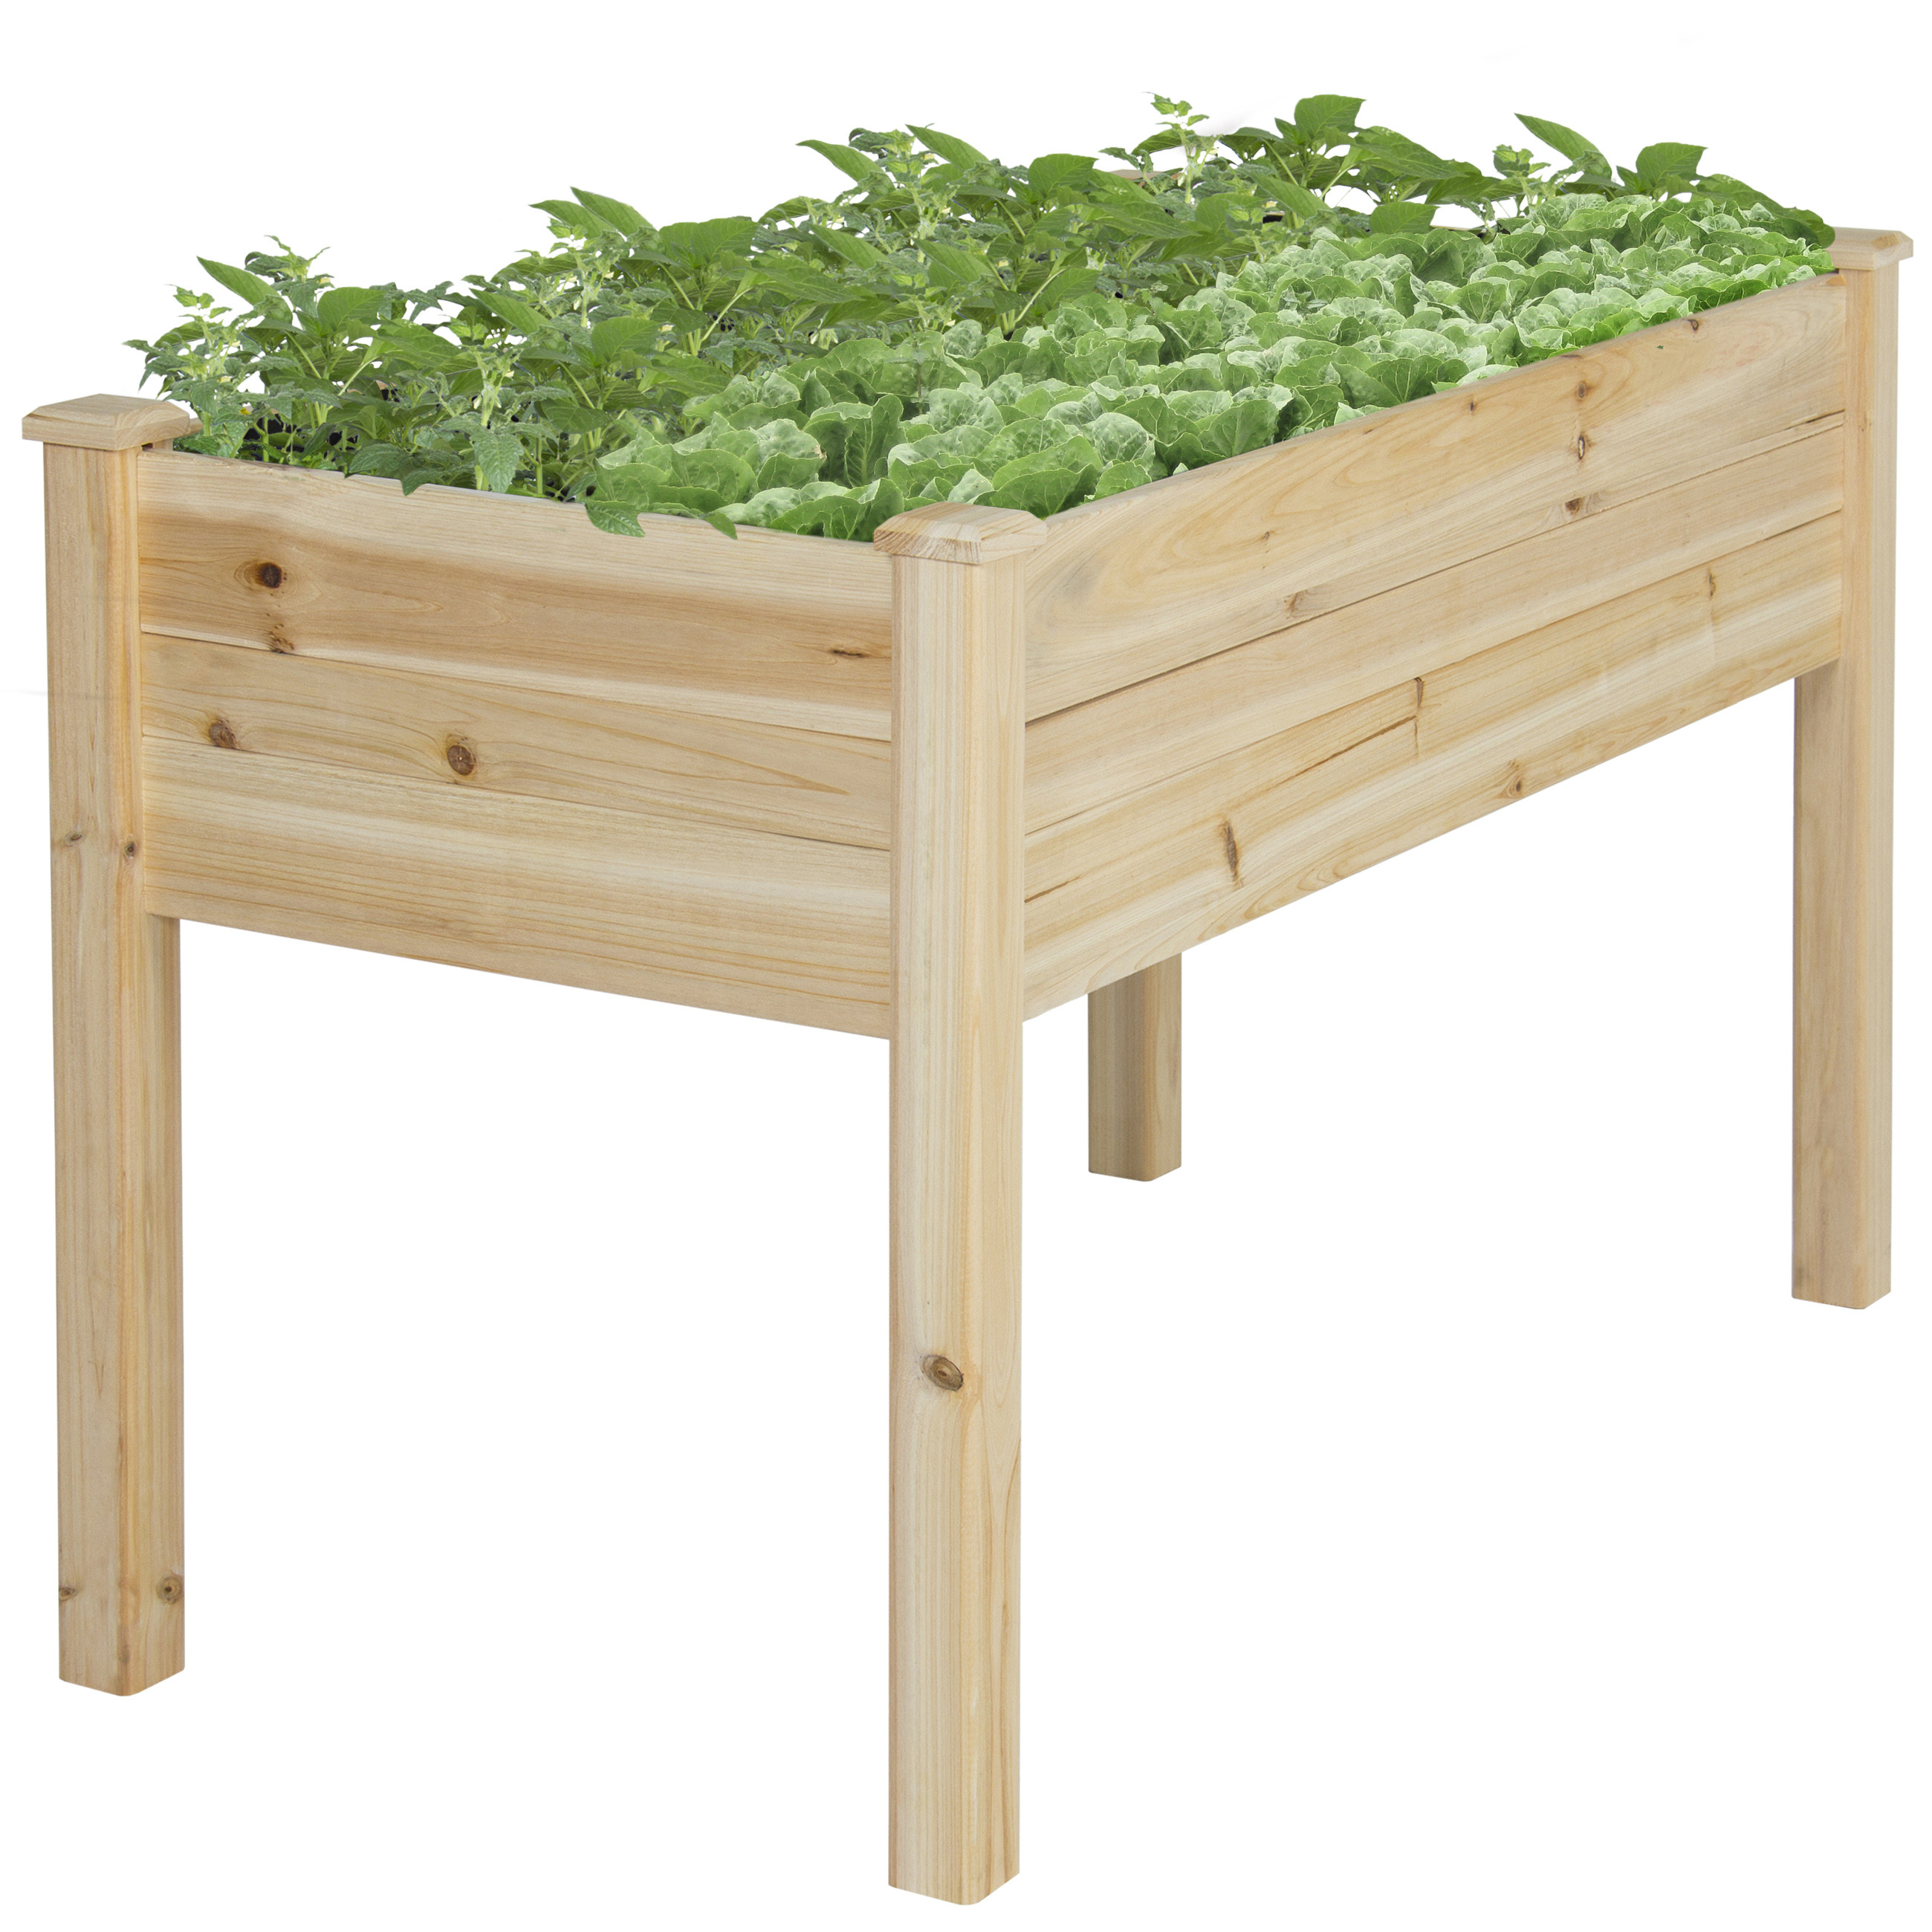 Best ideas about Elevated Garden Planter
. Save or Pin BCP Raised Ve able Garden Bed Elevated Planter Kit Grow Now.